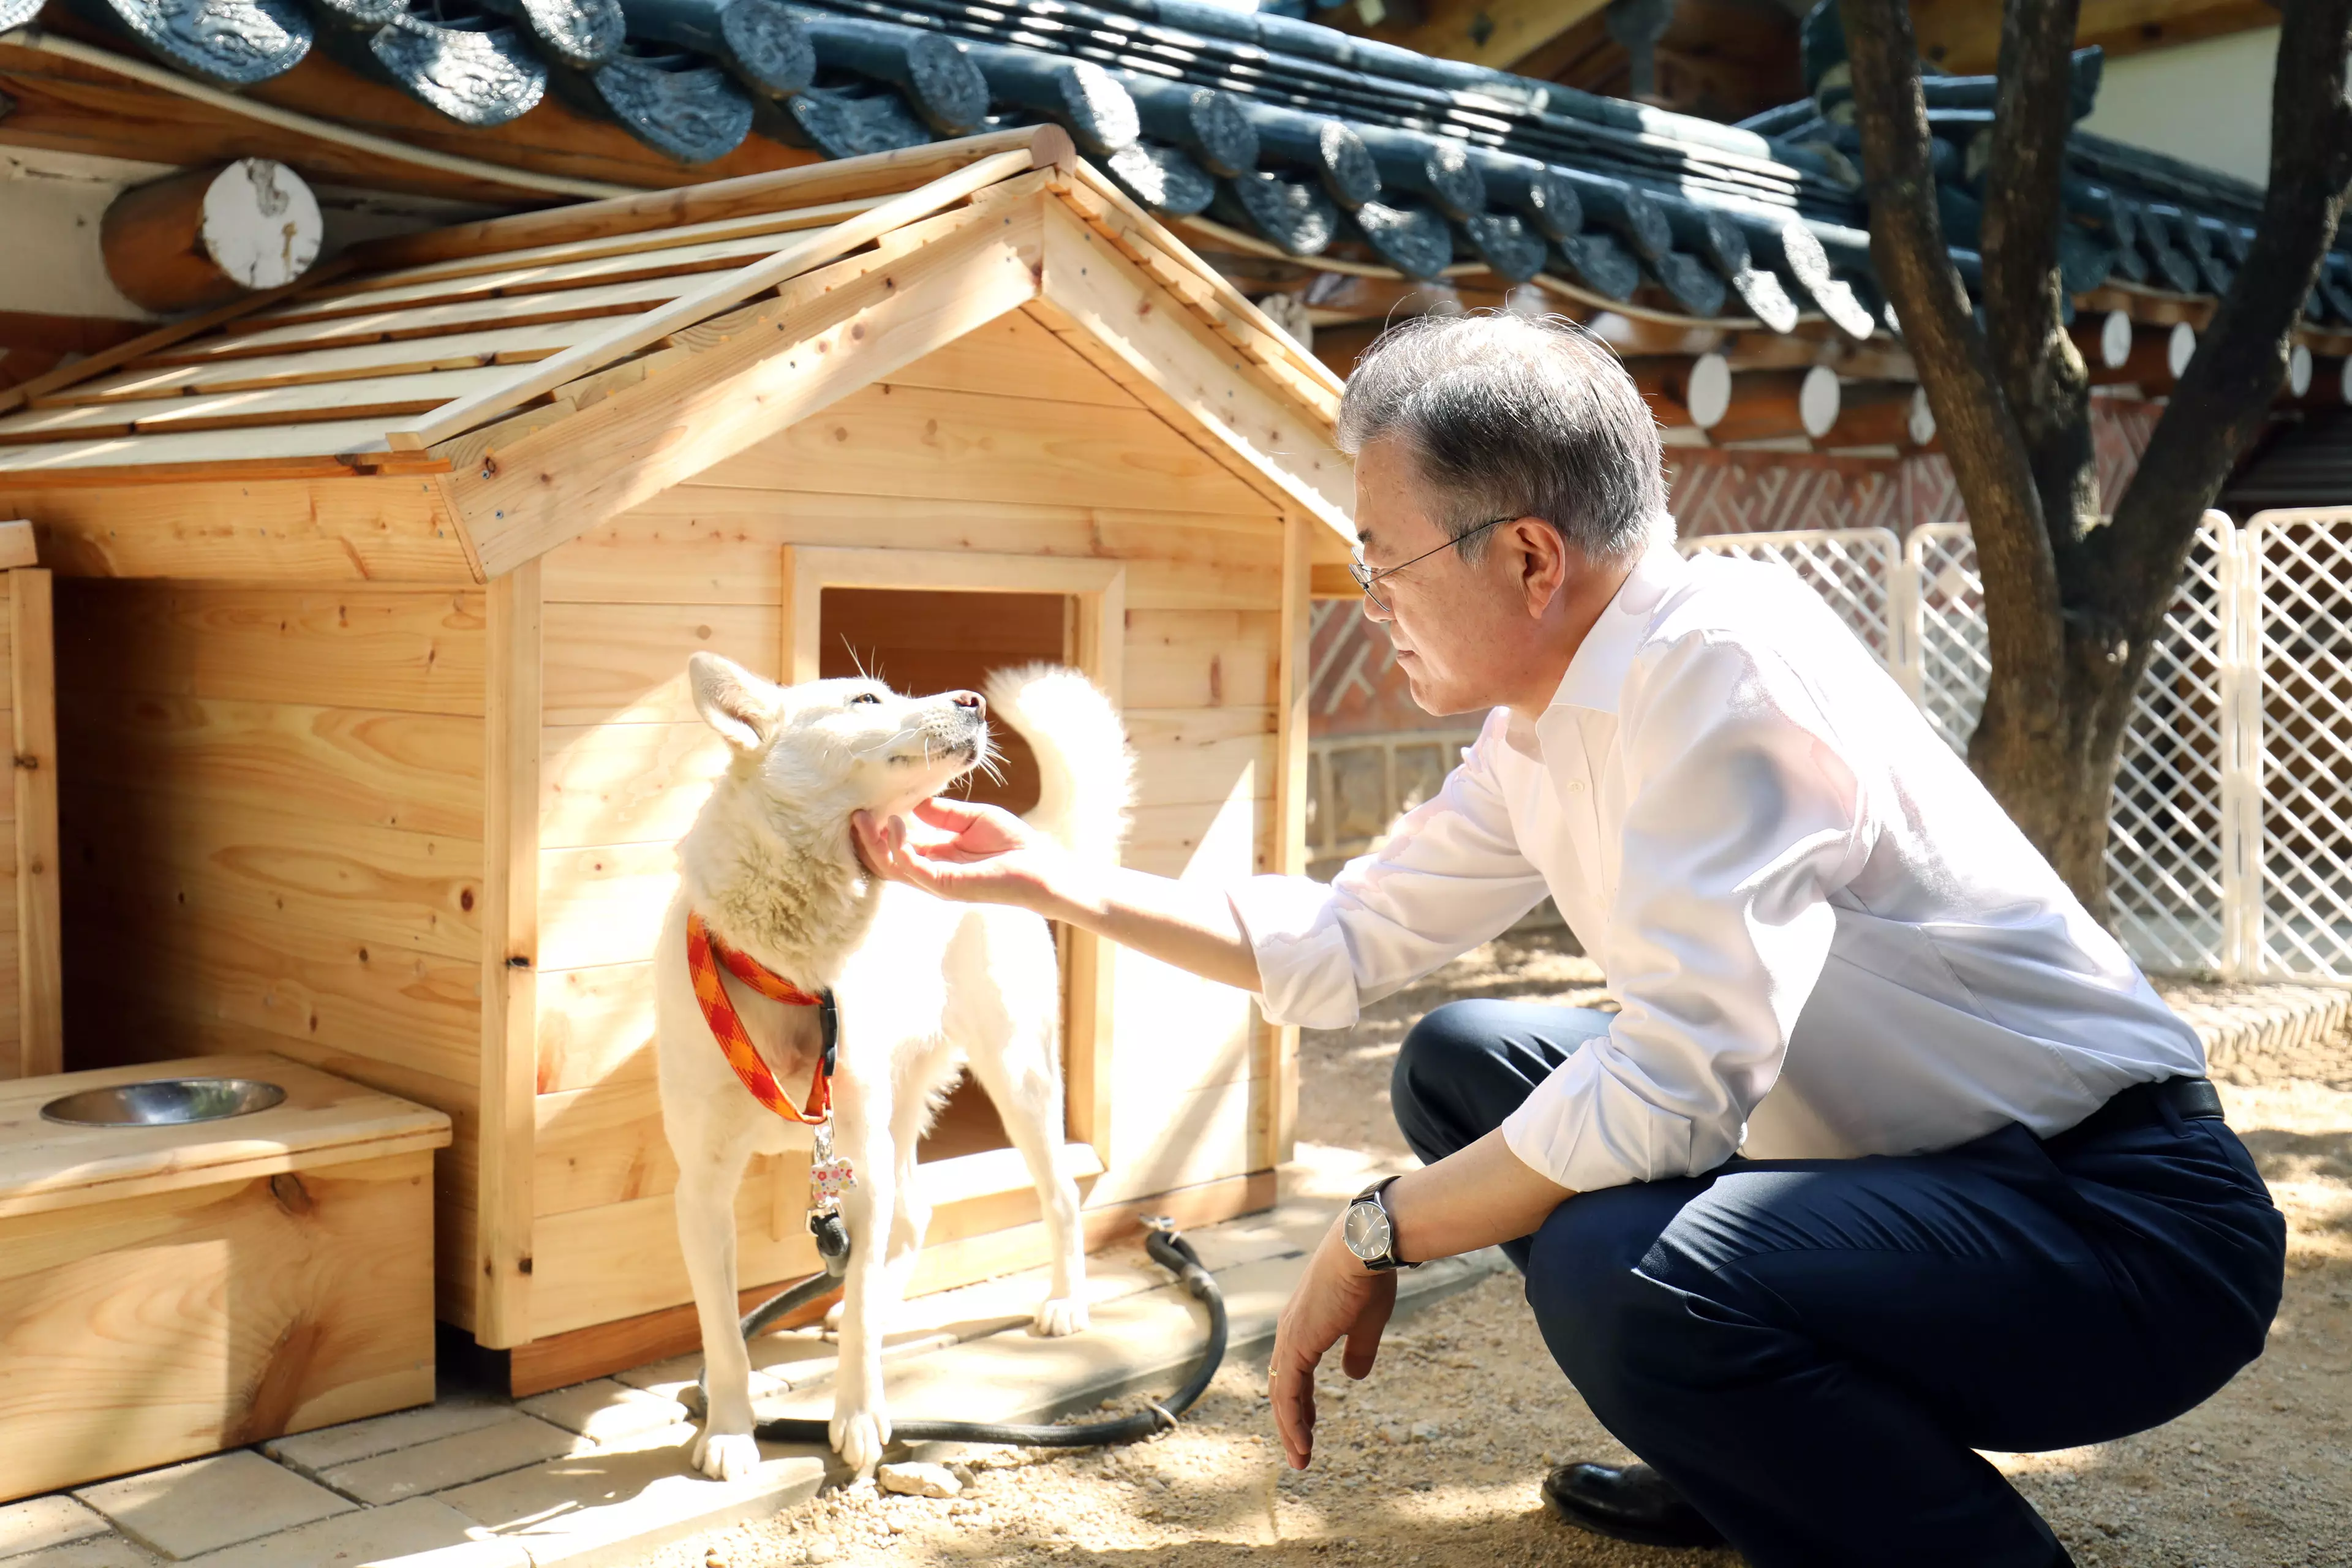 Moon is the first leader to bring a rescue dog into the Blue House.